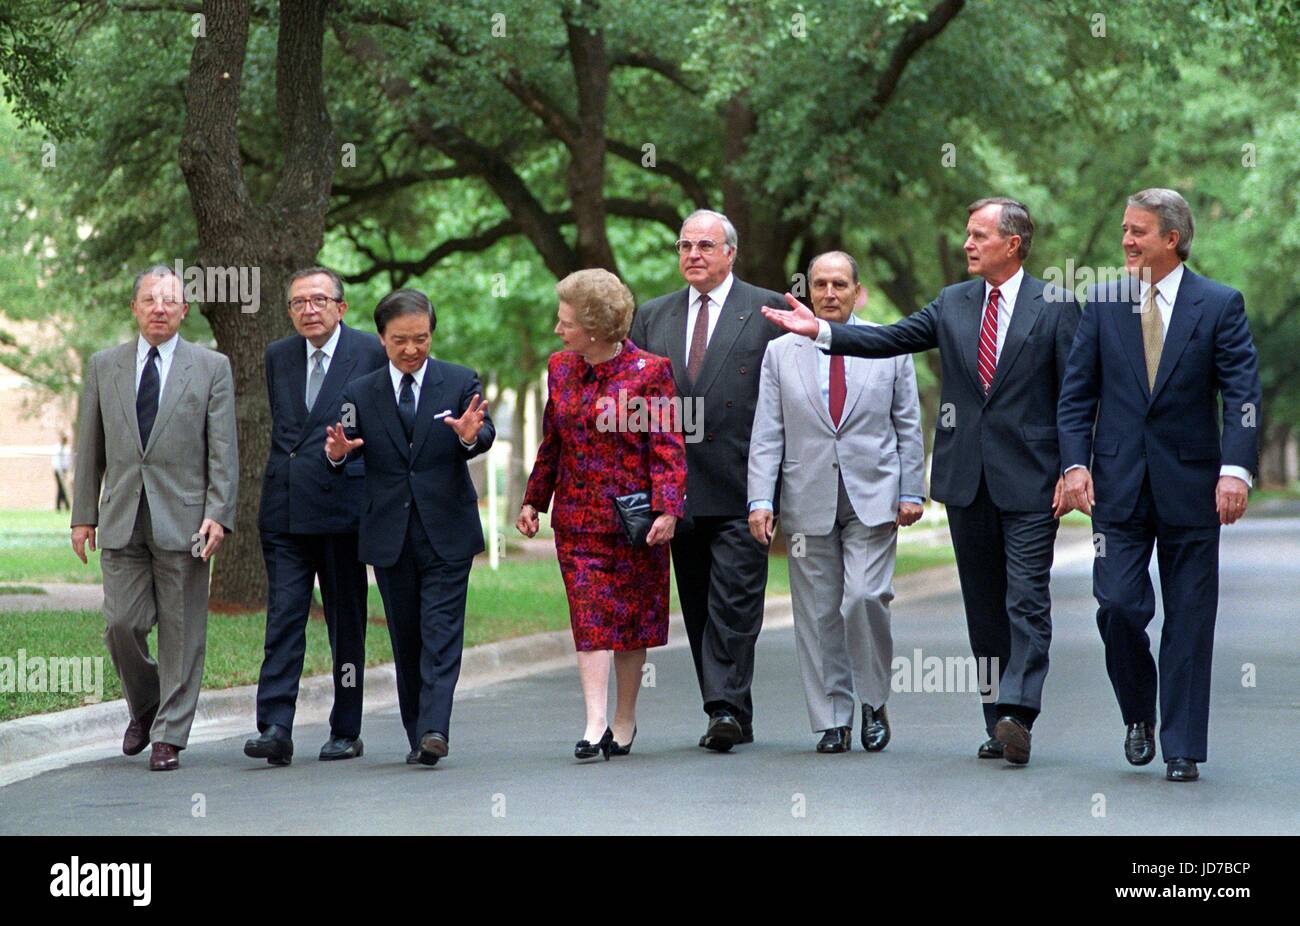 ARCHIVE - (L-R): President of the European Commission, Jacques Delors, the Italian prime minister Giulio Andreotti, the Japanese prime minister Toshiki Kaifu, the British prime minister Margaret Thatcher, Former German chancellor Kohl, French president Francois Mitterrand, US president George Bush and Canadian prime minister Brian Mulroney can be seen in Houston, USA, 11 July 1990. The G7 summit ended without concrete result after three days. Kohl passed away at the age of 87 in Eggershaim on the 16th of June 2017. He was chancellor for 16 years and head of the party CDU for quarter of a centu Stock Photo